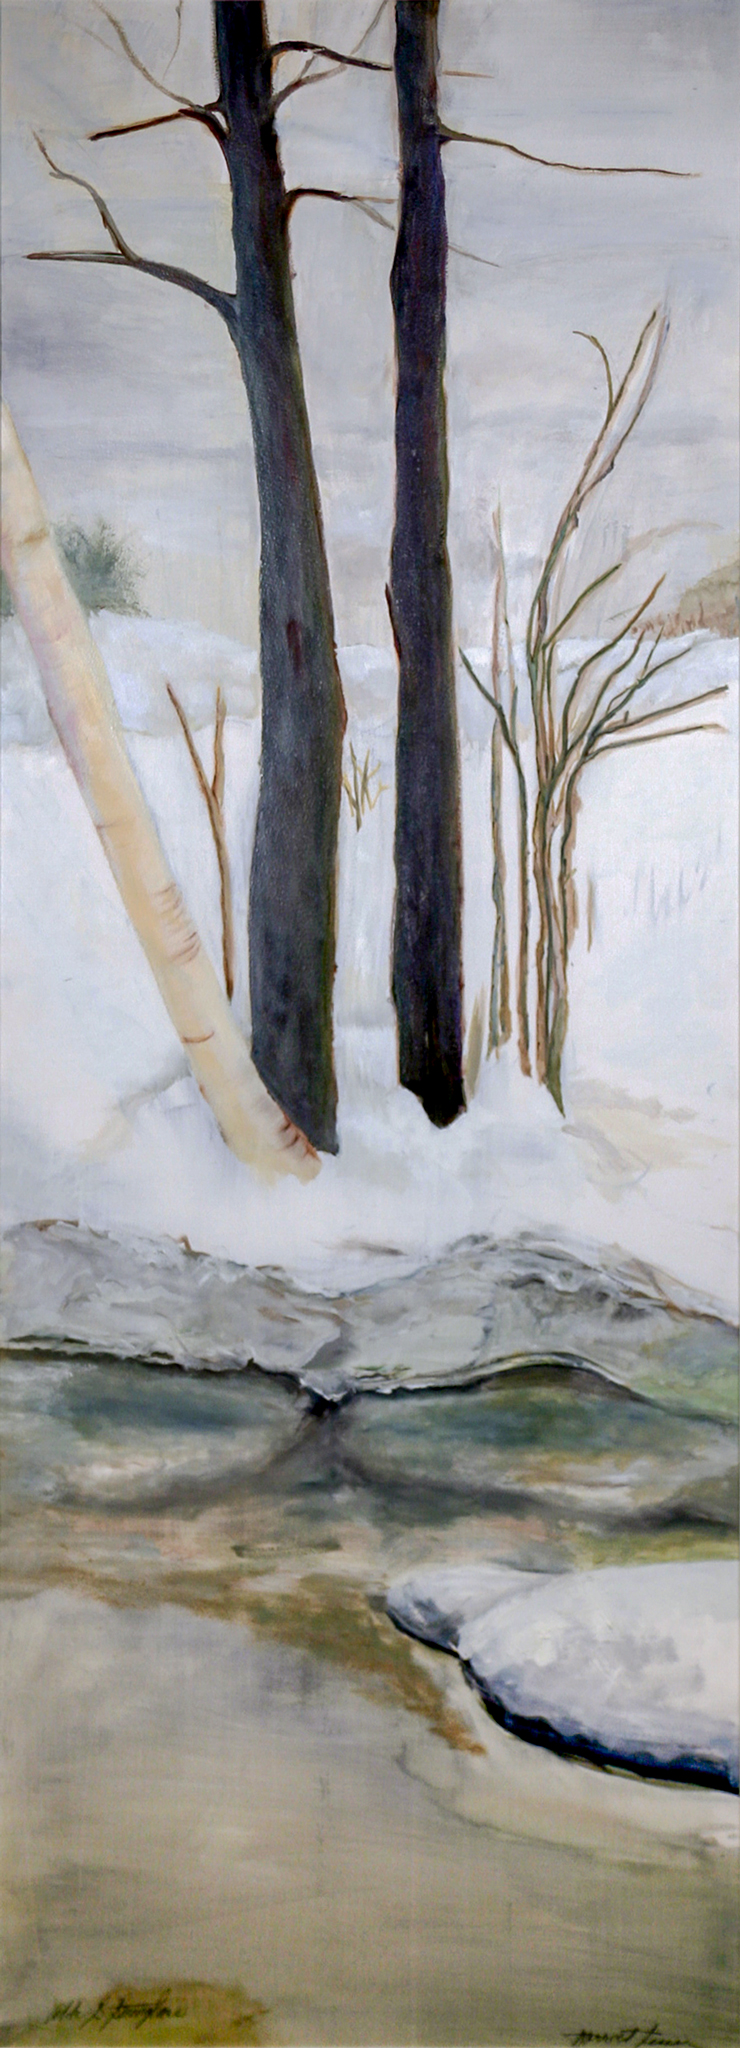   Snow V  (one of a six-panel screen) oil/paper/wood 